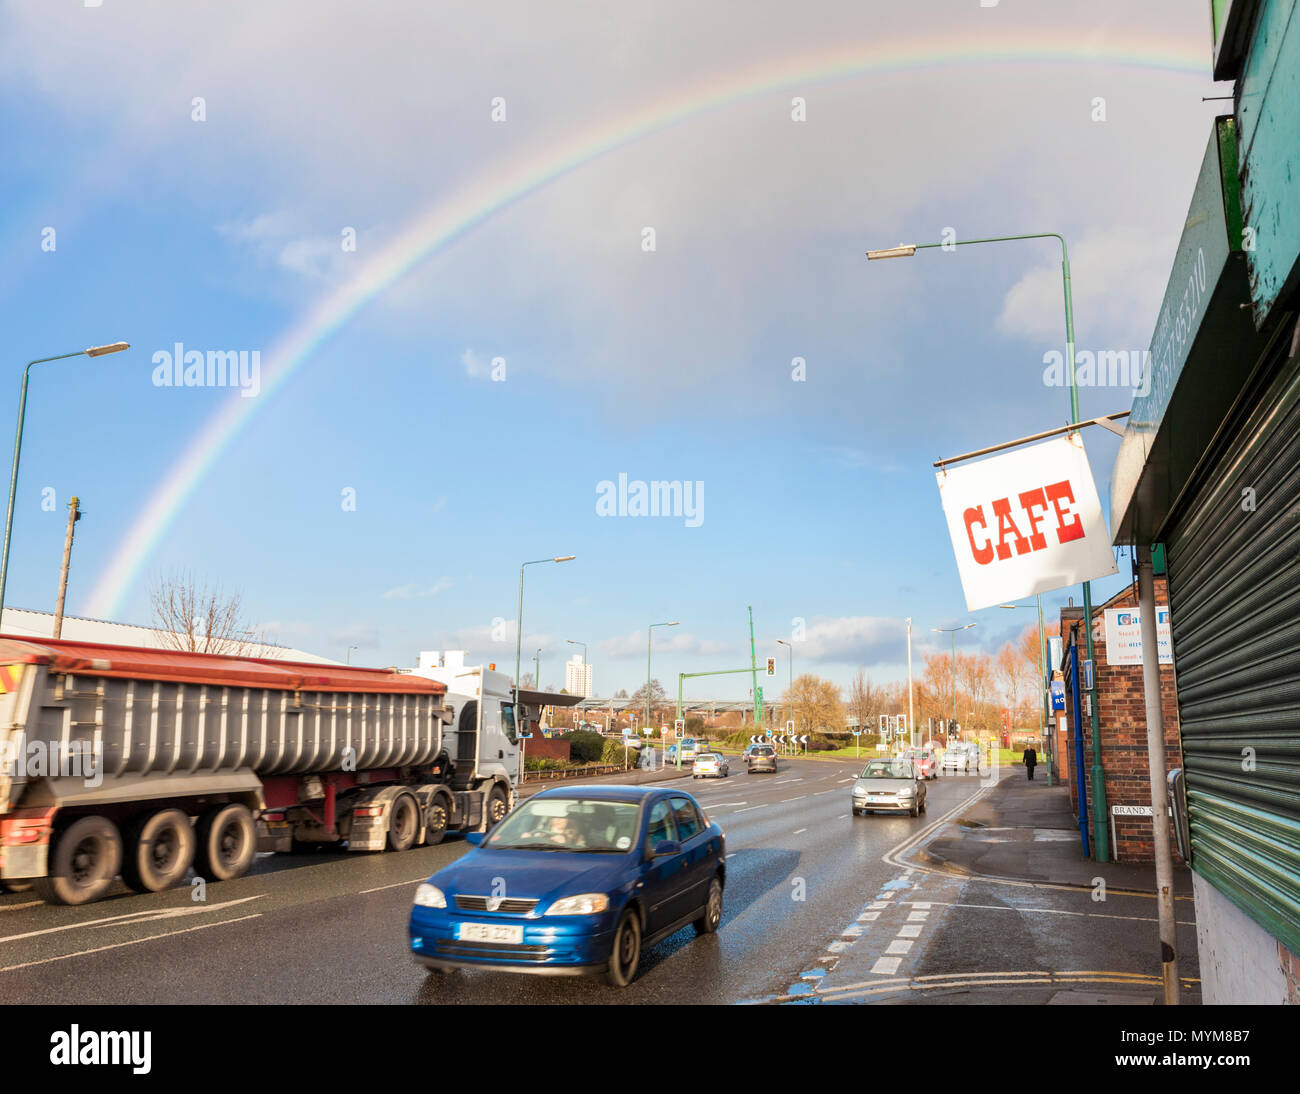 A double rainbow over a city street with traffic, Nottingham, England, UK Stock Photo